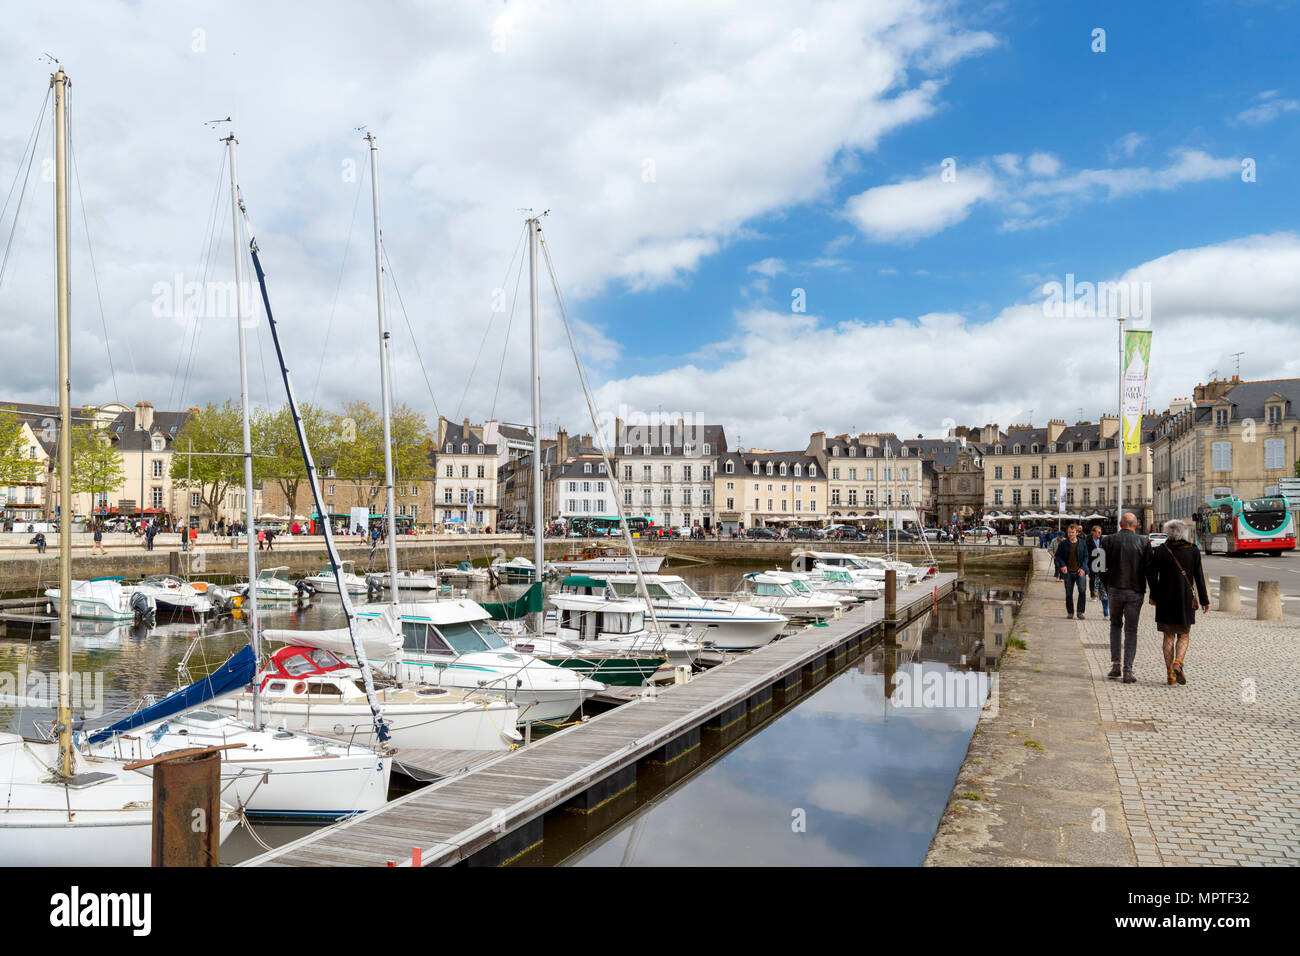 The harbour looking towards the old town, Vannes, Brittany, France Stock Photo